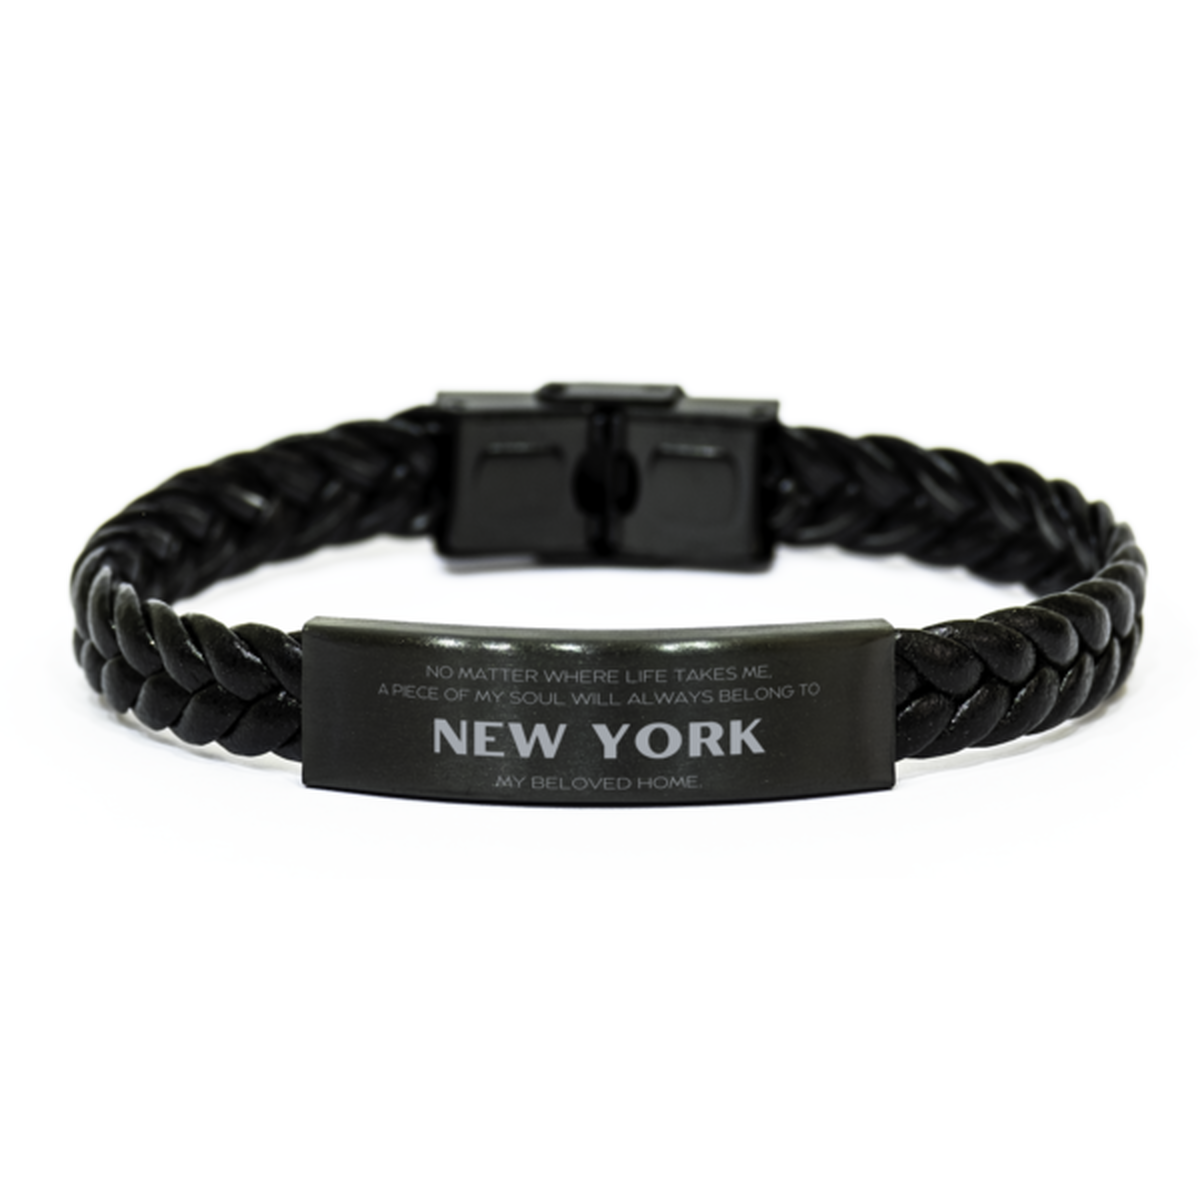 Love New York State Gifts, My soul will always belong to New York, Proud Braided Leather Bracelet, Birthday Unique Gifts For New York Men, Women, Friends